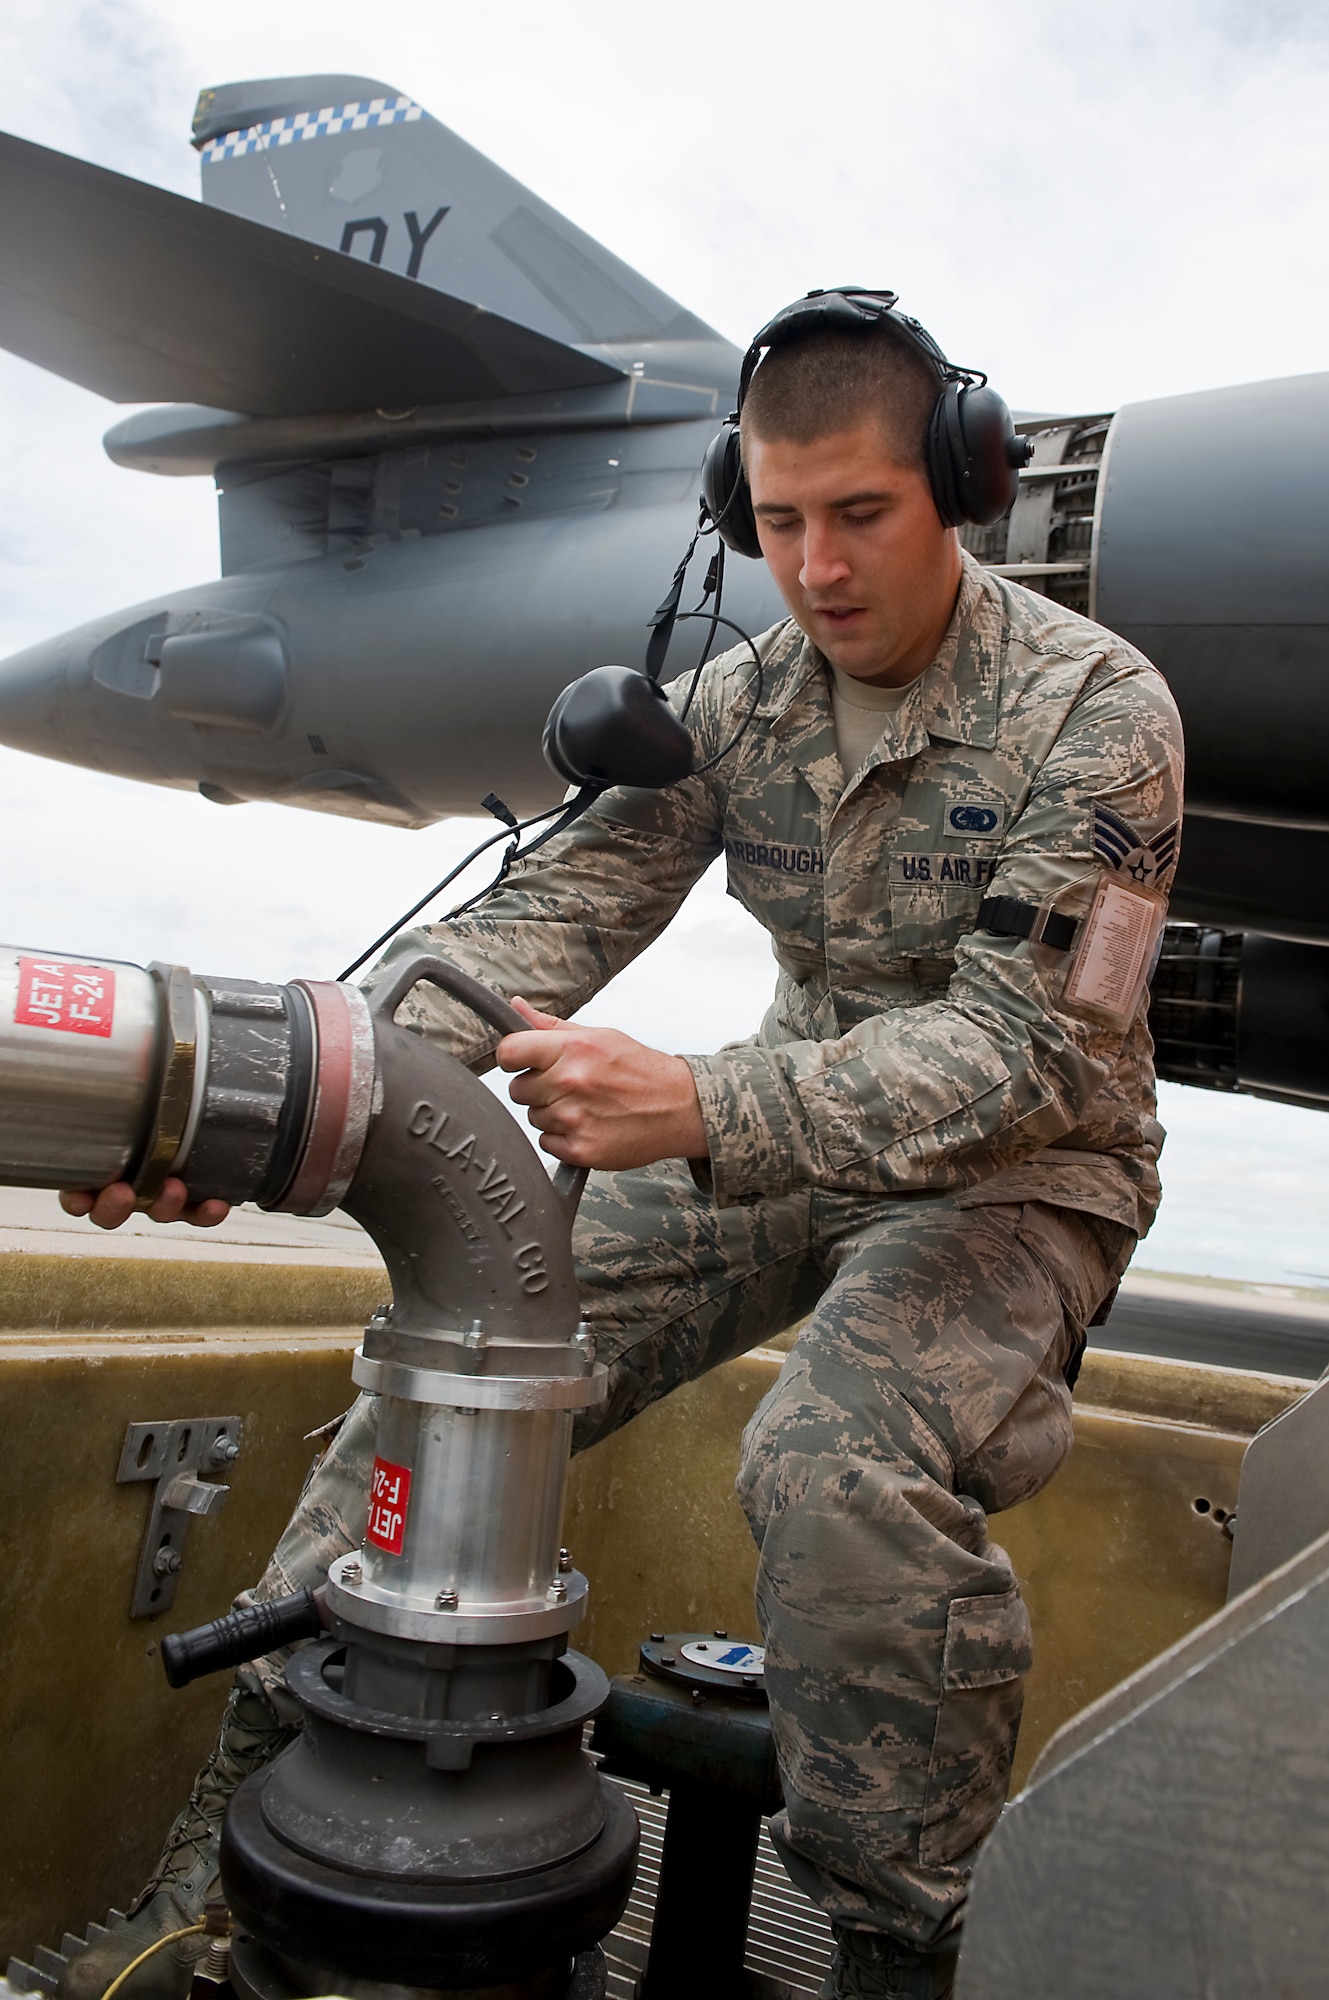 U.S. Air Force Senior Airman Lance Scarbrough, 7th Logistics Readiness Squadron, Petroleum, Oils and Lubricants flight, connects a moose head to a fuel pit prior to a hot-pit refuel Aug. 14, 2013, at Dyess Air Force Base, Texas. On July 19, while providing support to an outbound deploying aircraft, Scarbrough was the first to respond when a civilian employee fell from a maintenance stand onto his head and neck. (U.S. Air Force photo by Airman 1st Class Peter Thompson/Released)